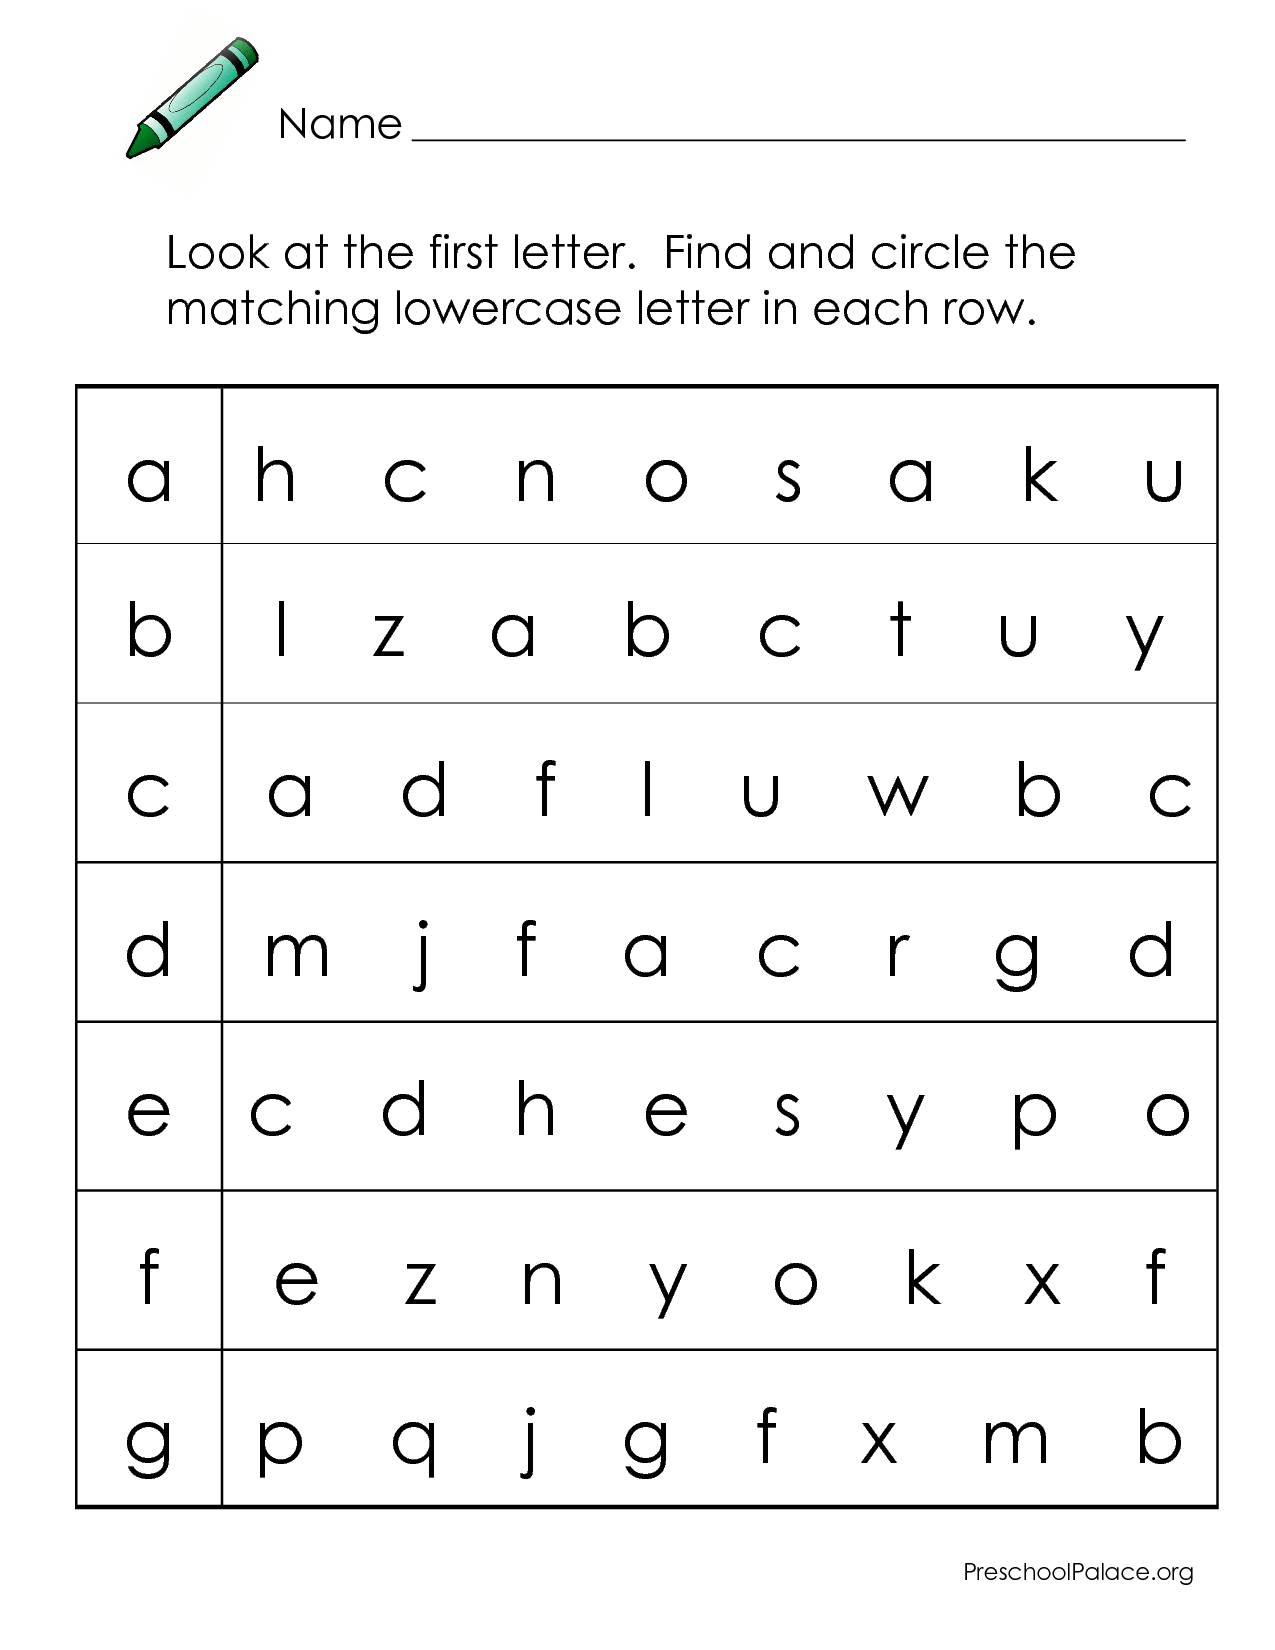 Abcs - Letter Matching A-G Lowercase | Letter Recognition with Alphabet Review Worksheets For Kindergarten